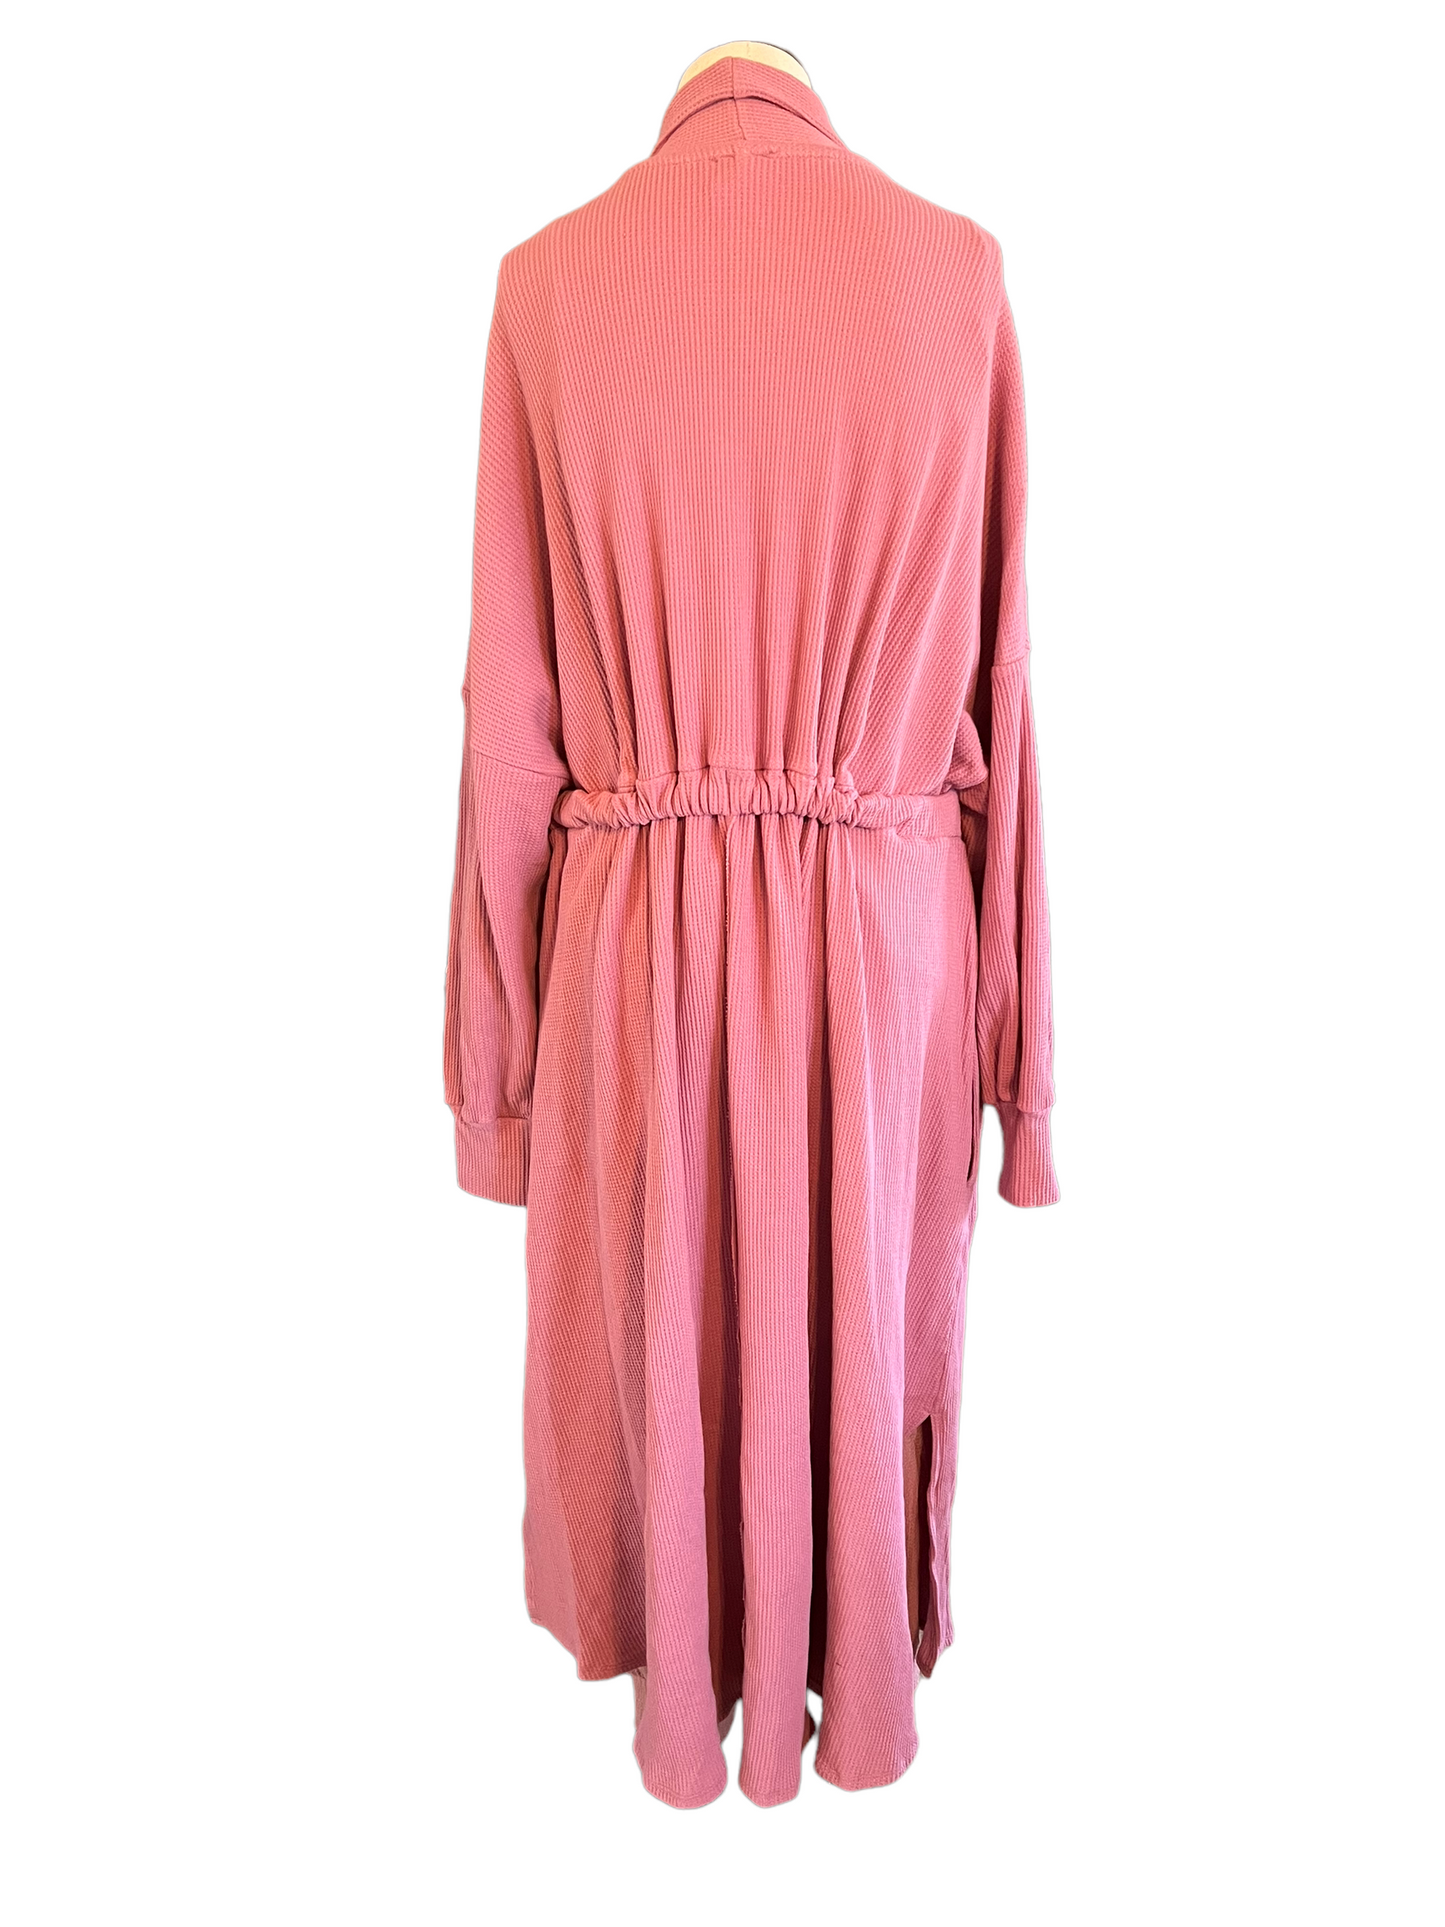 Intimately Free People Pink Size XS 'Under the Stars' Cardigan